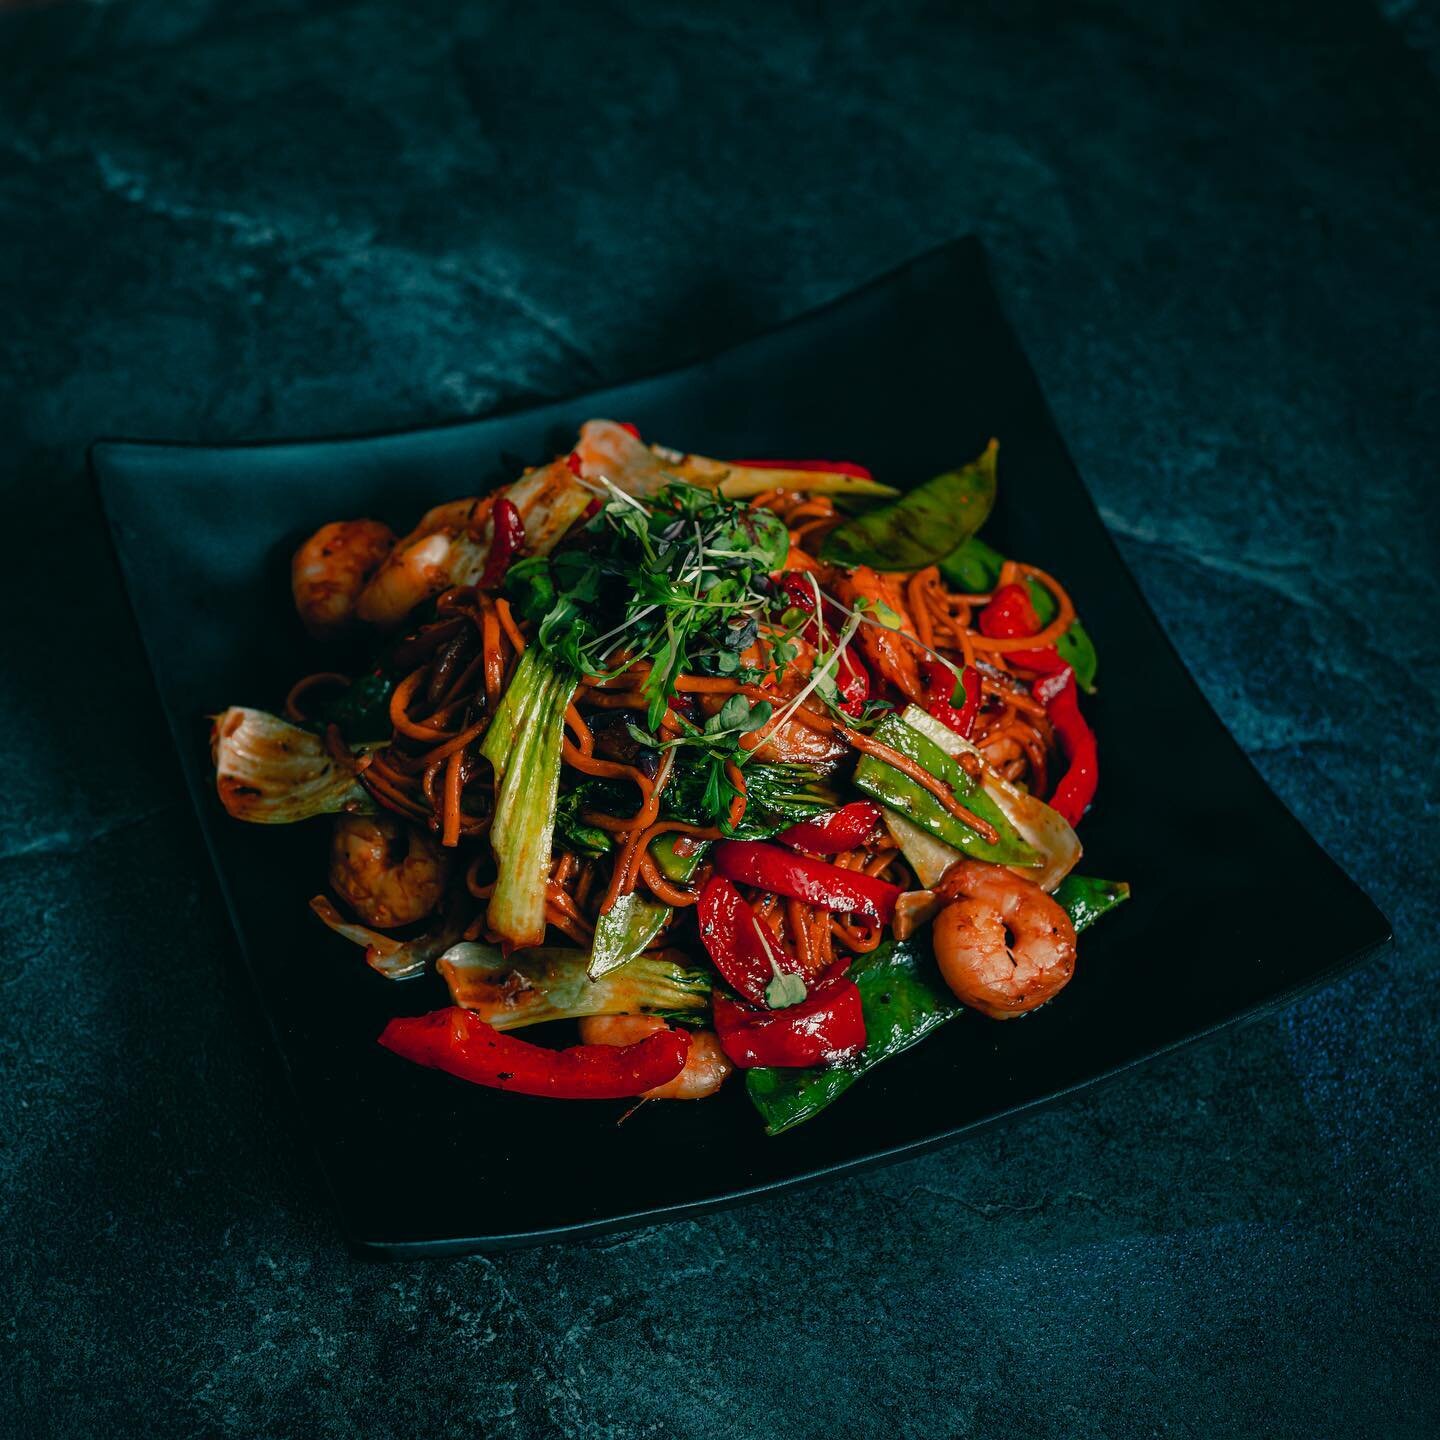 Our noodles 🥢 have that perfect balance of sweet and sour 😝 Tossed in a wok with crunchy pak choi, mangetout and spring onions. All you have to choose is between Teryaki Chicken or Bang Bang Prawn 🧨 😏

Book your table at N&Ouml;A ❤️
Visit www.noa